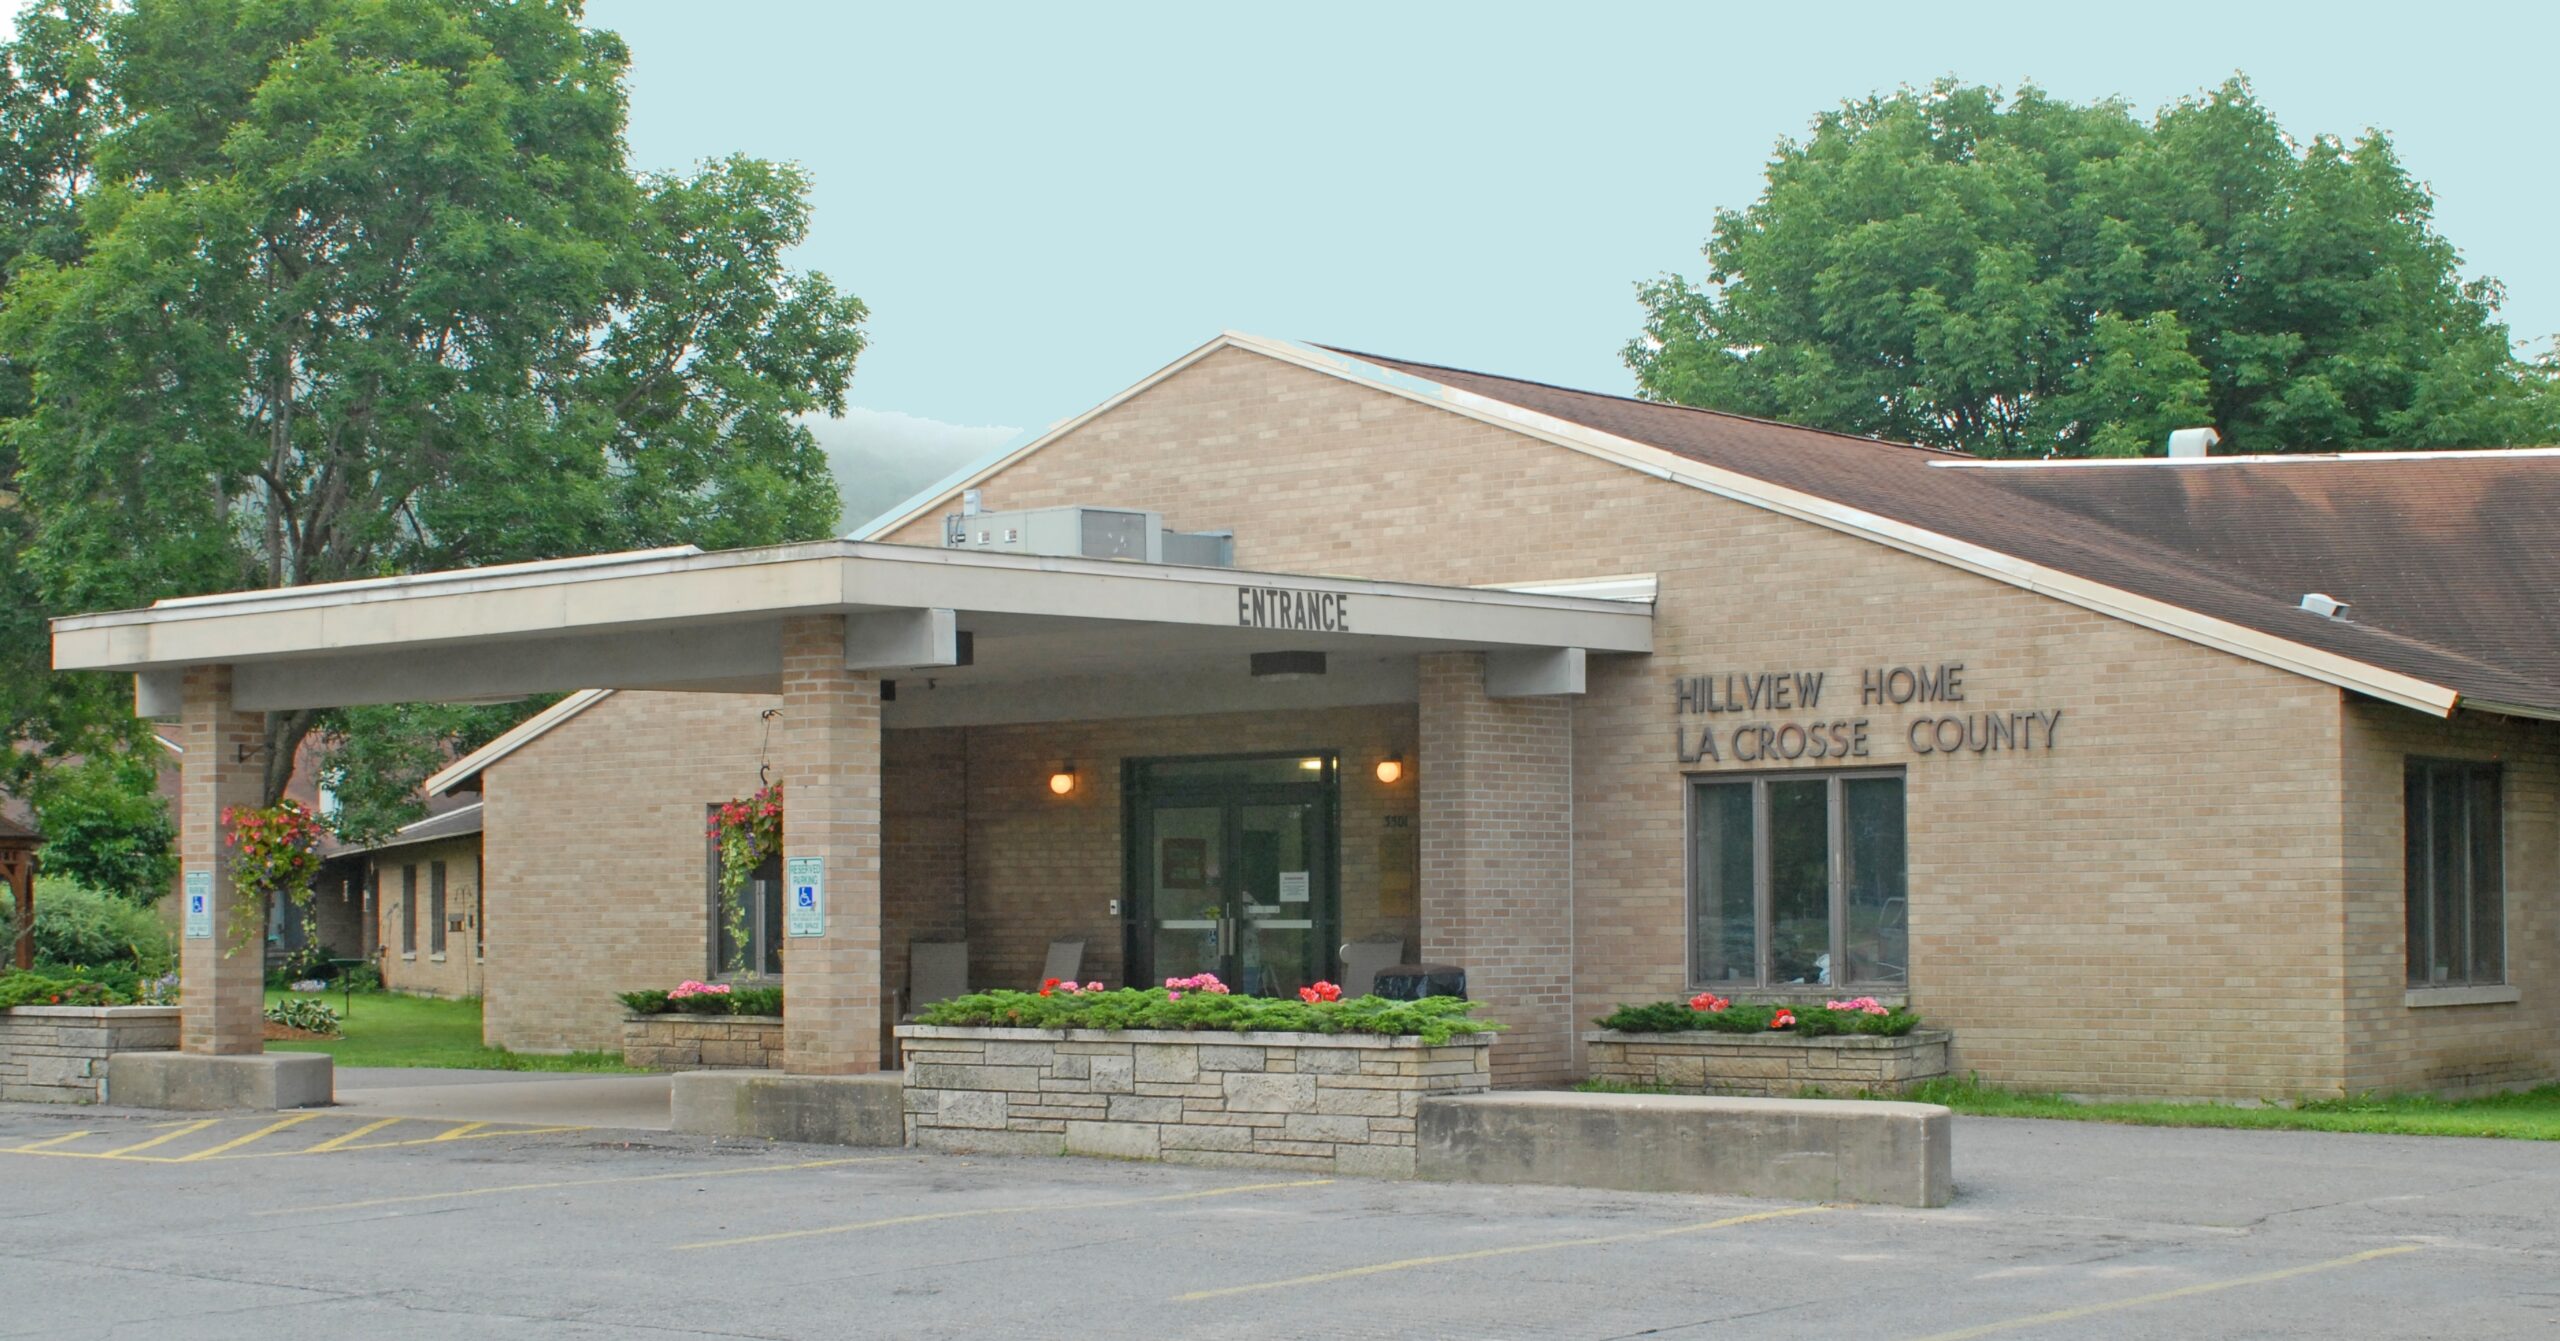 Entrance of the Hillview Health Care Center building